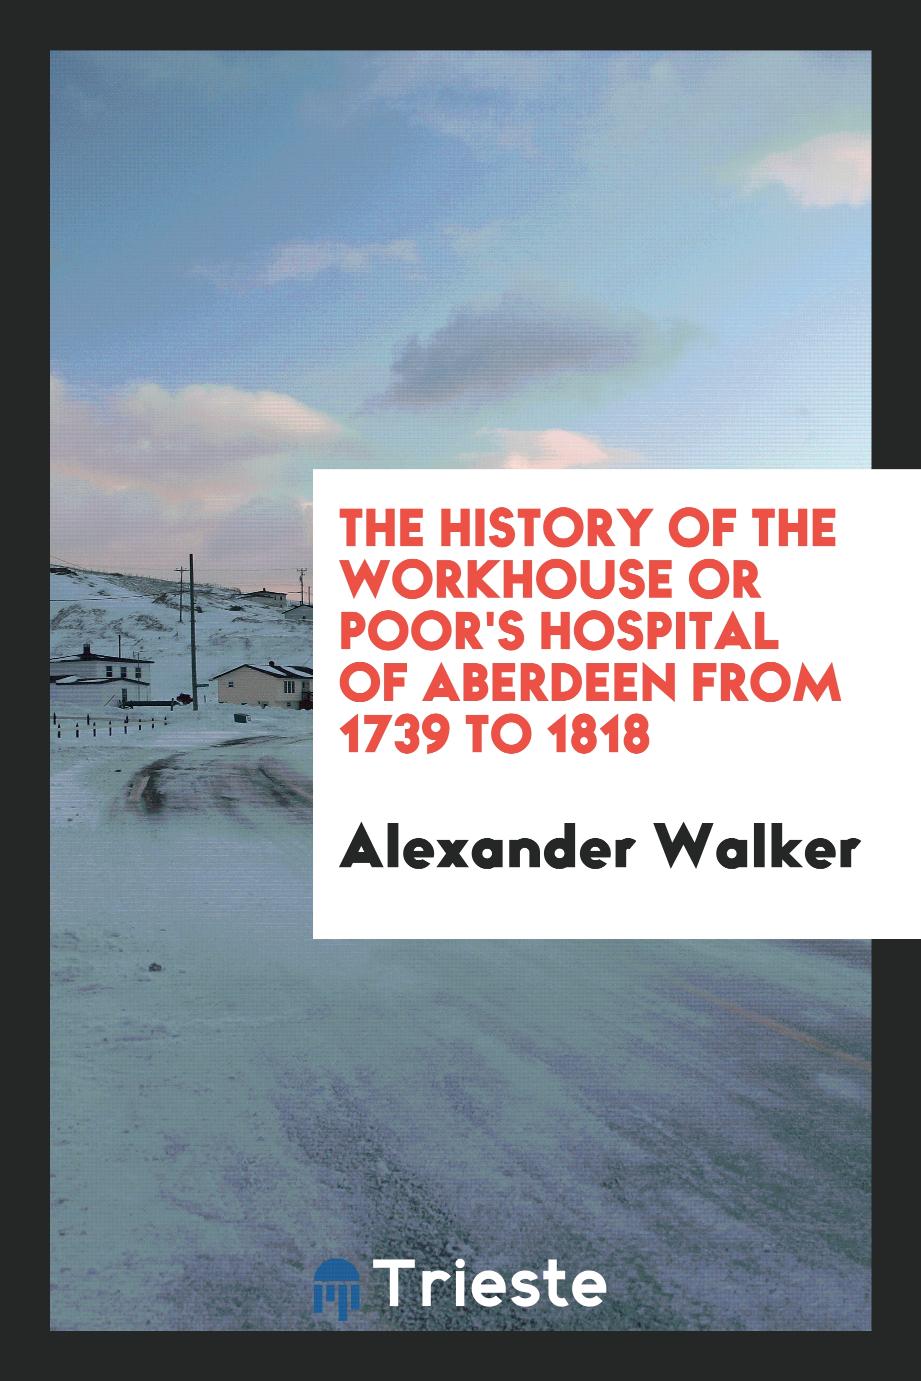 The history of the Workhouse or Poor's Hospital of Aberdeen from 1739 to 1818